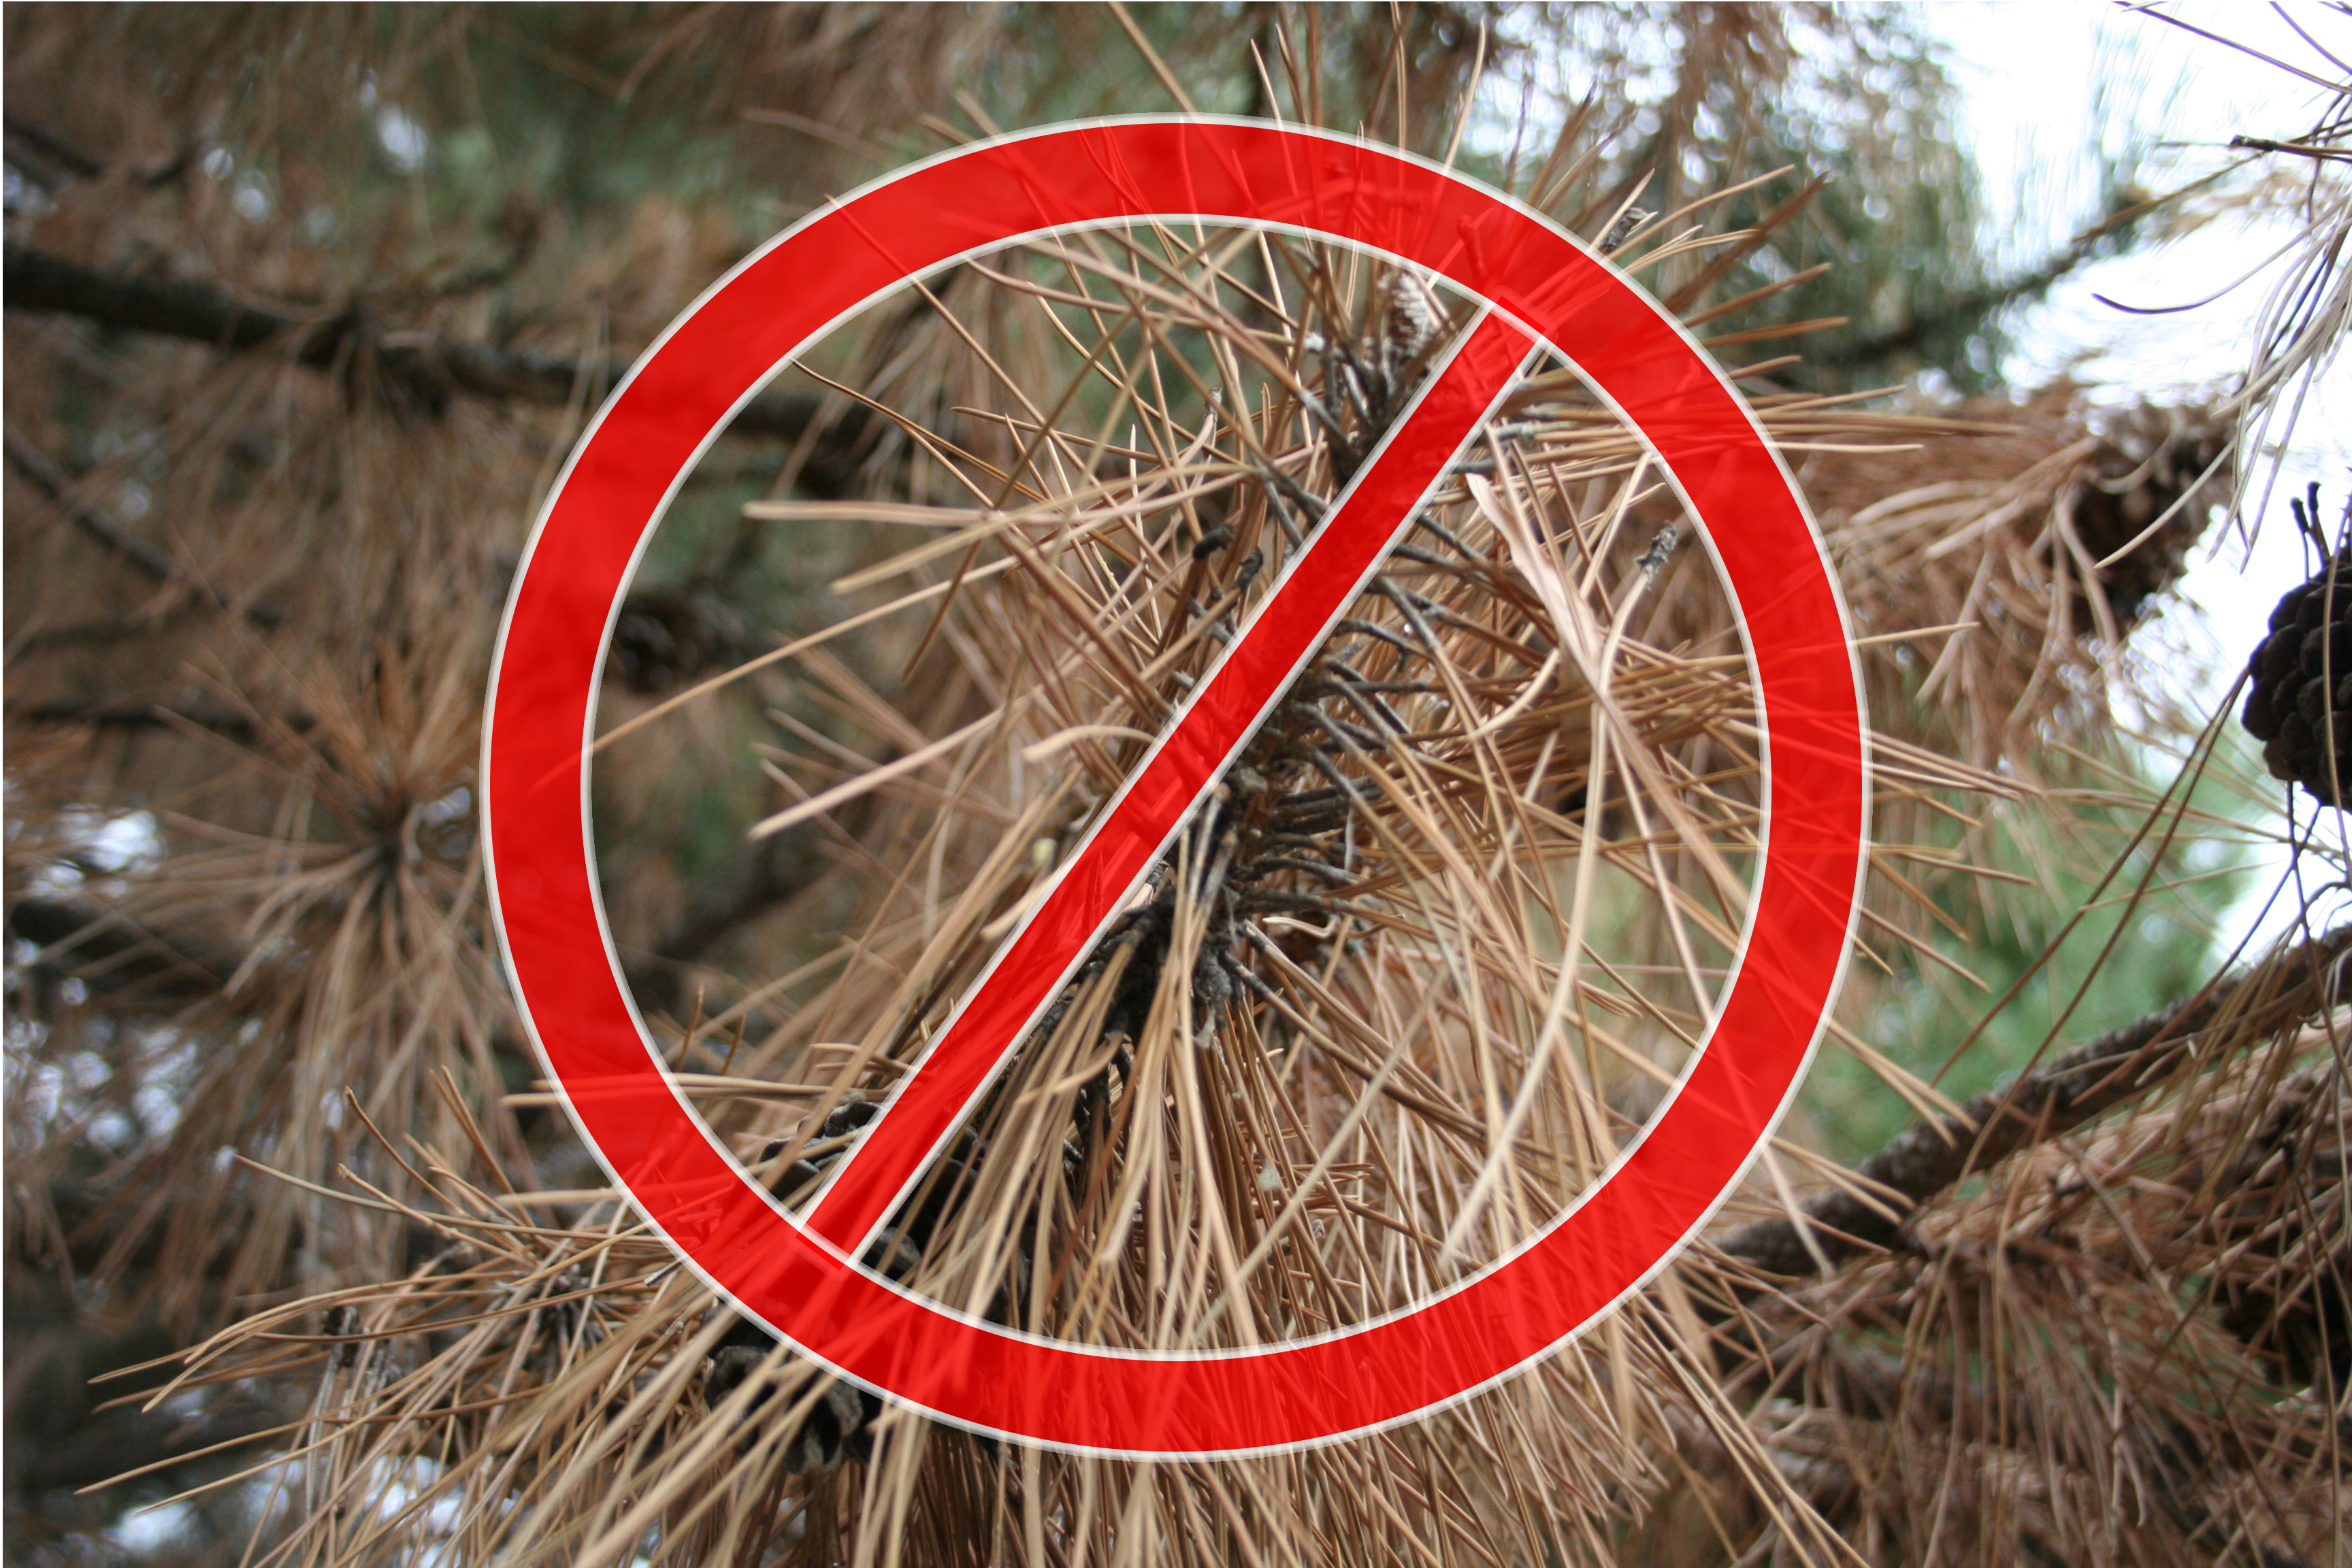 Scotch pine is no longer recommended for planting in Nebraska. 